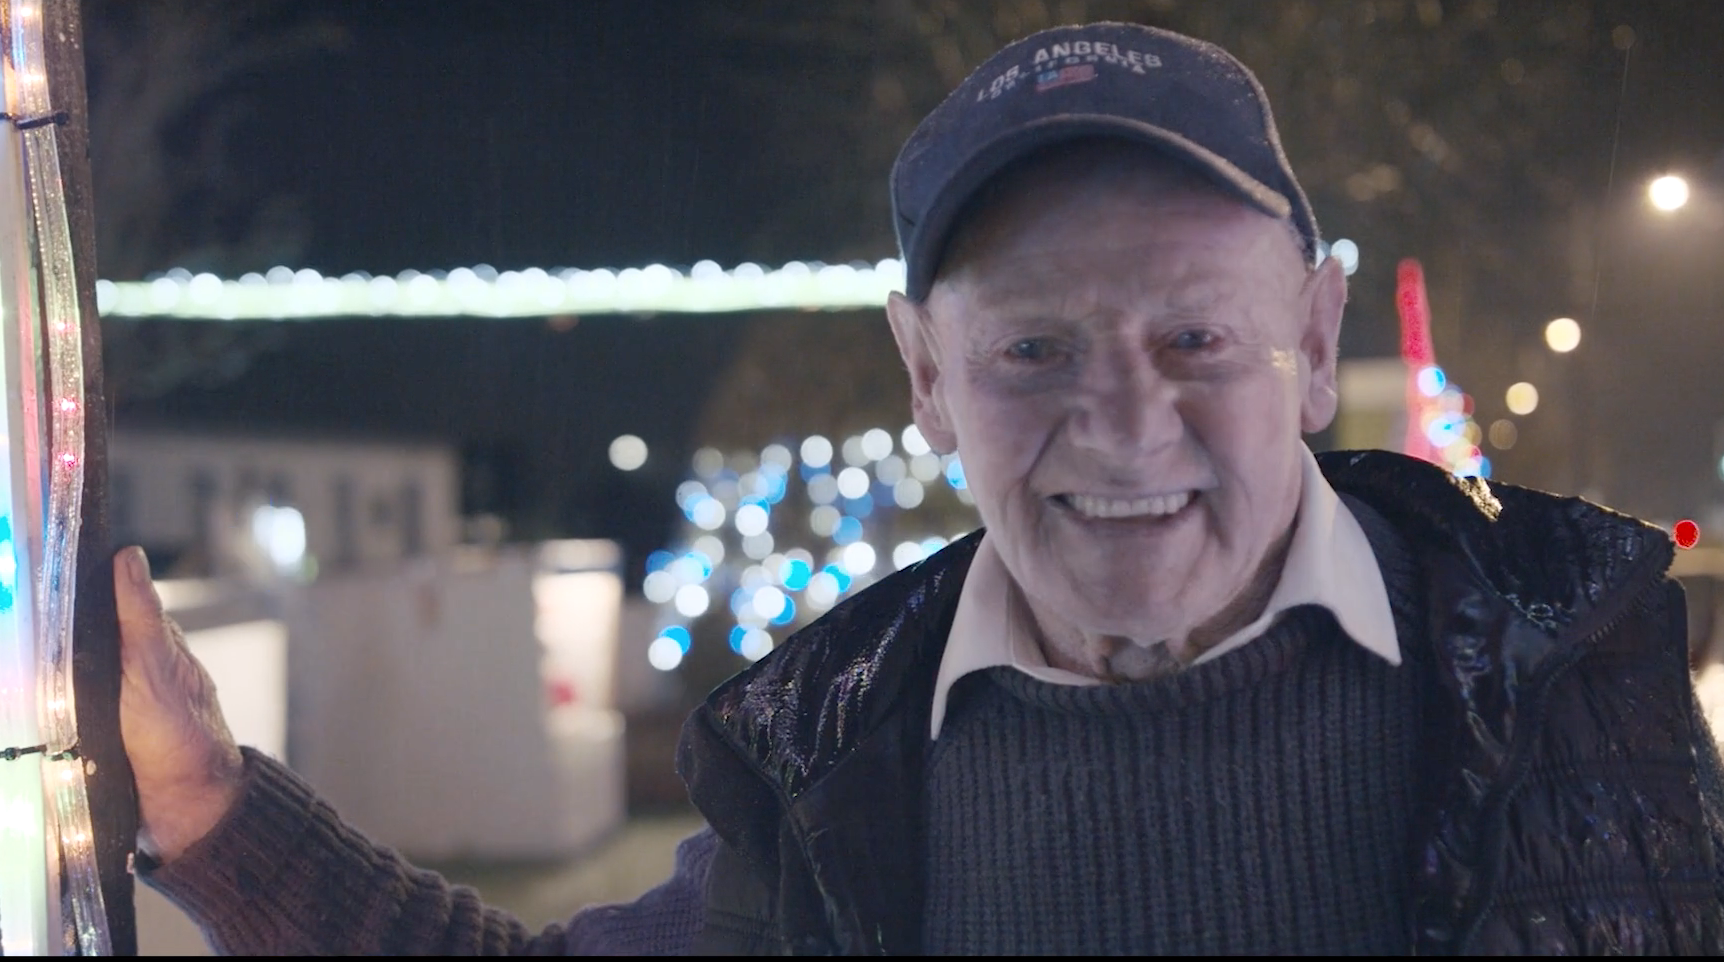 WATCH: Meet 88-year-old ‘Paddy Christmas’ who has become a local hero for his festive lights